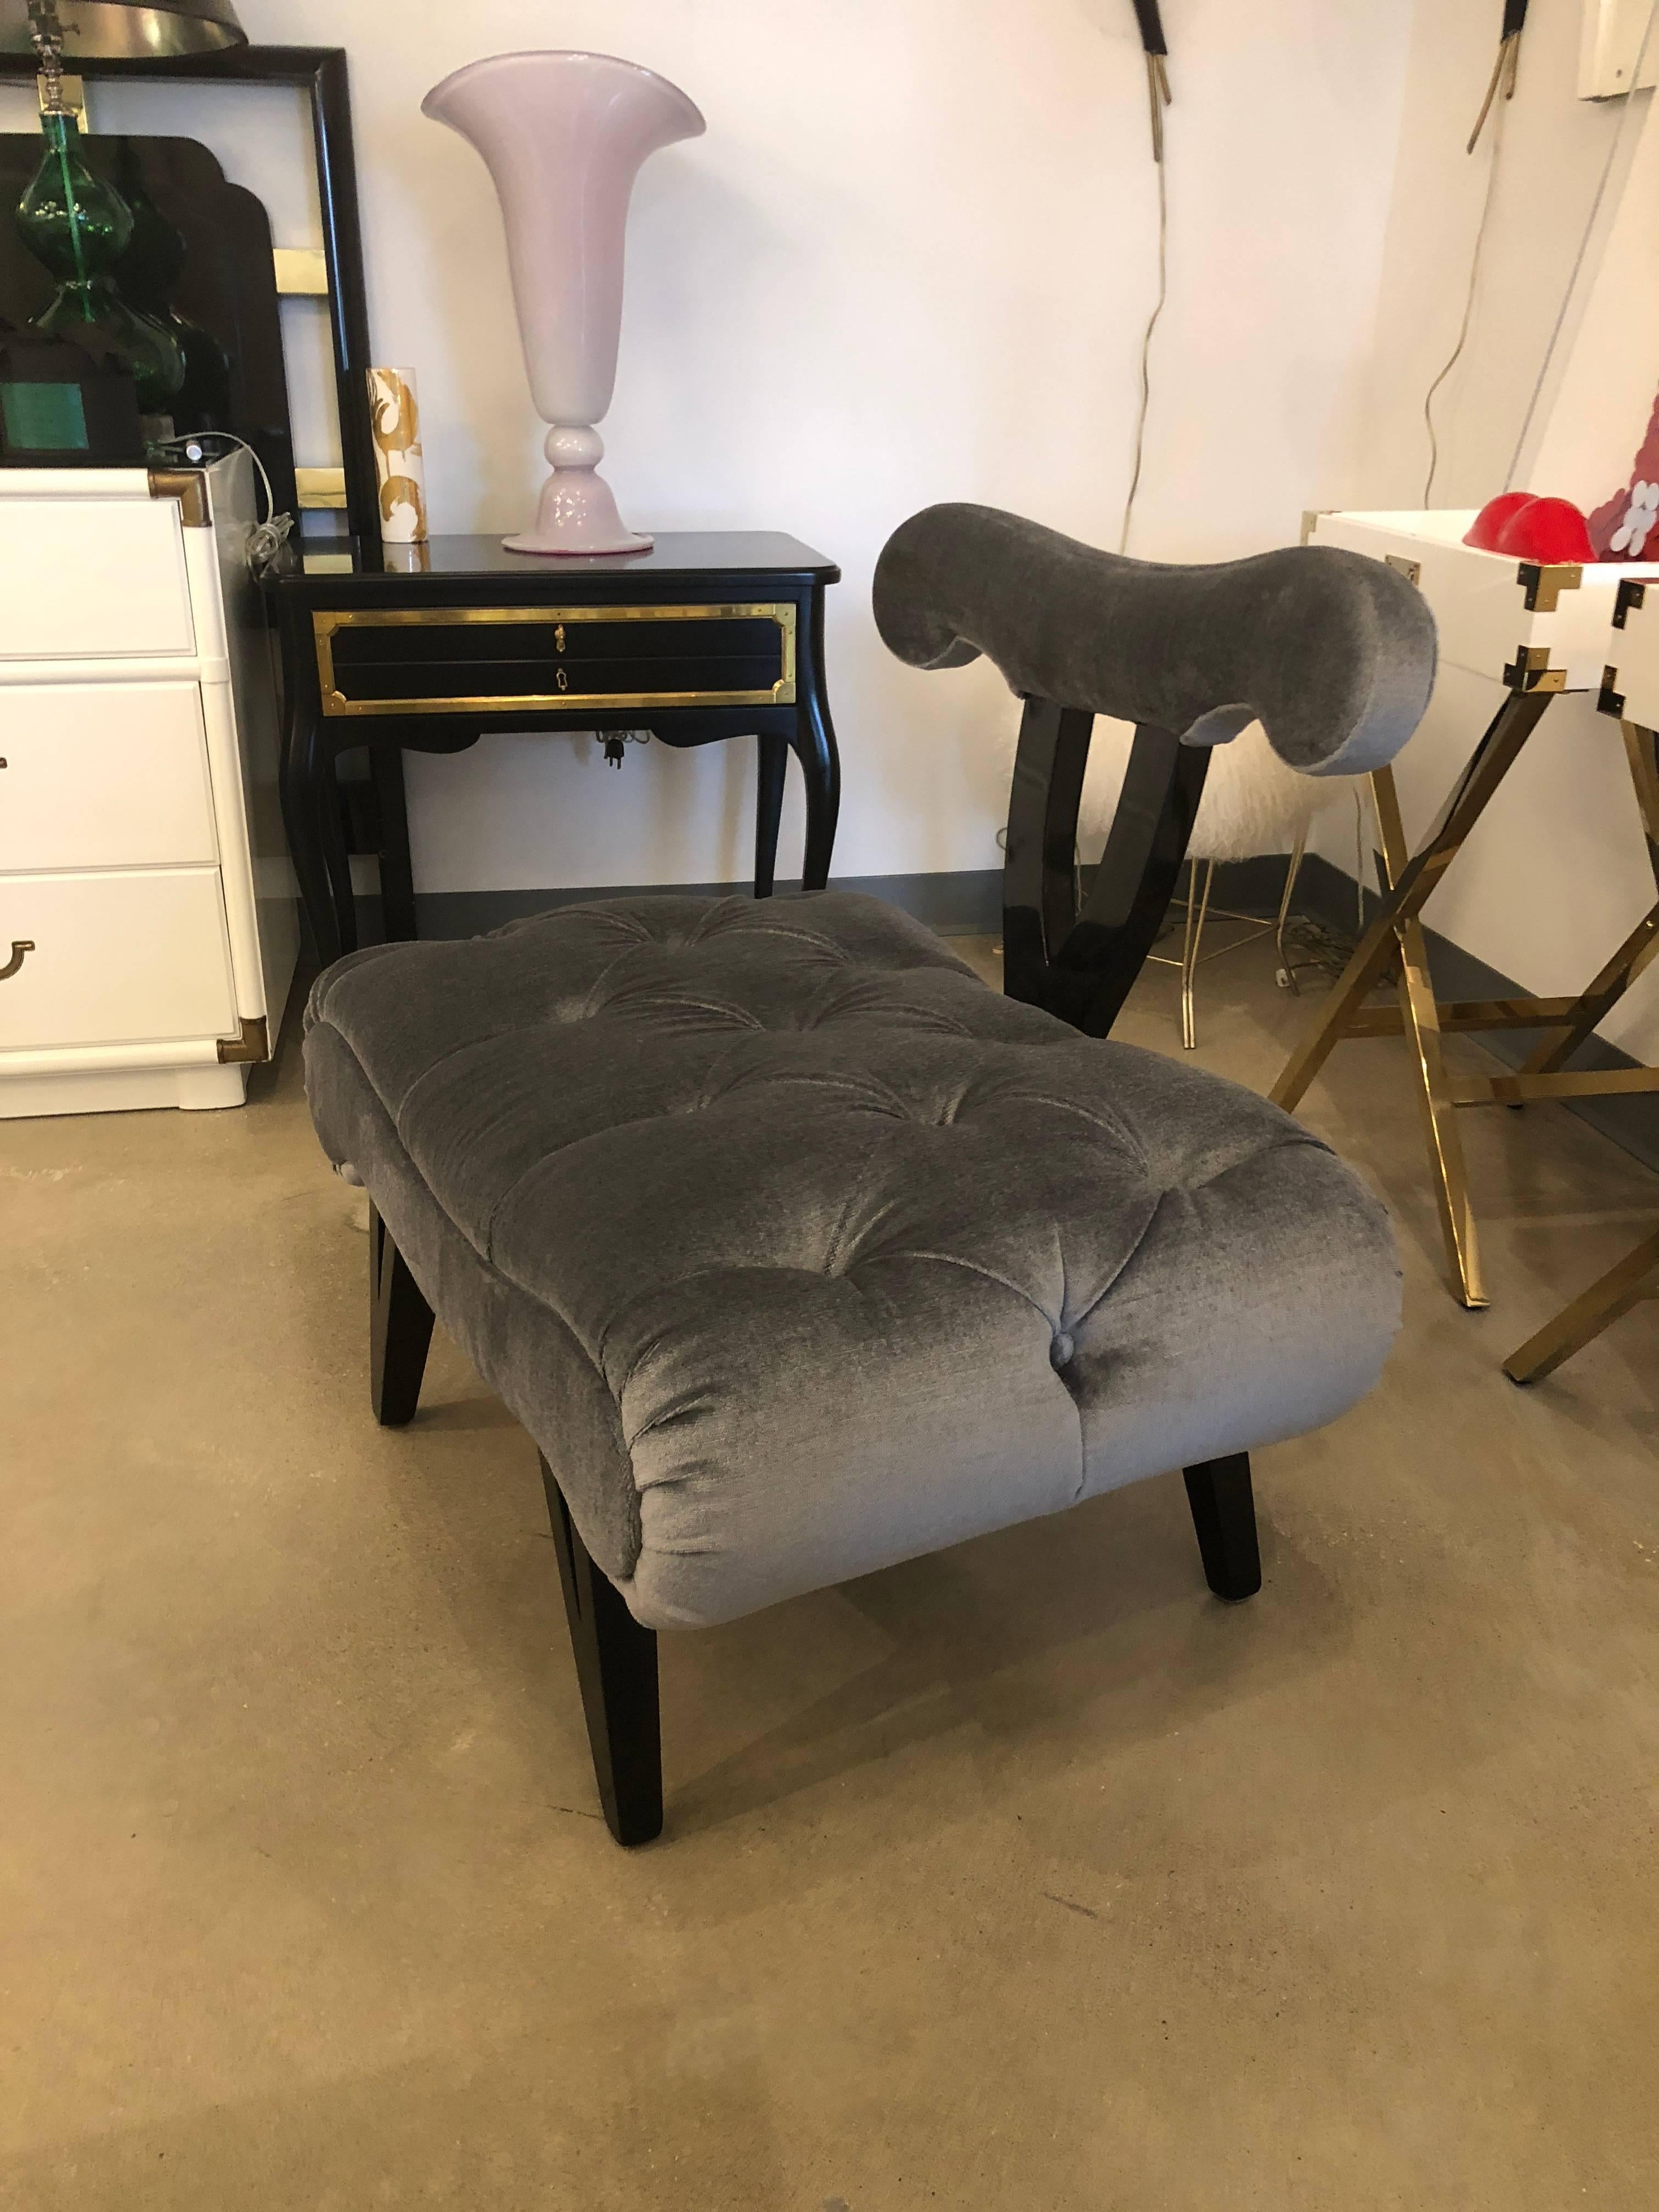 Offered is a Hollywood Regency Mid-Century Modern Grosfeld House refurbished slipper chair in ebonized wood and a shimmering gray tufted mohair velvet. Would look fabulous with an offered pair of Grosfeld House lacquered in white with brass hardware